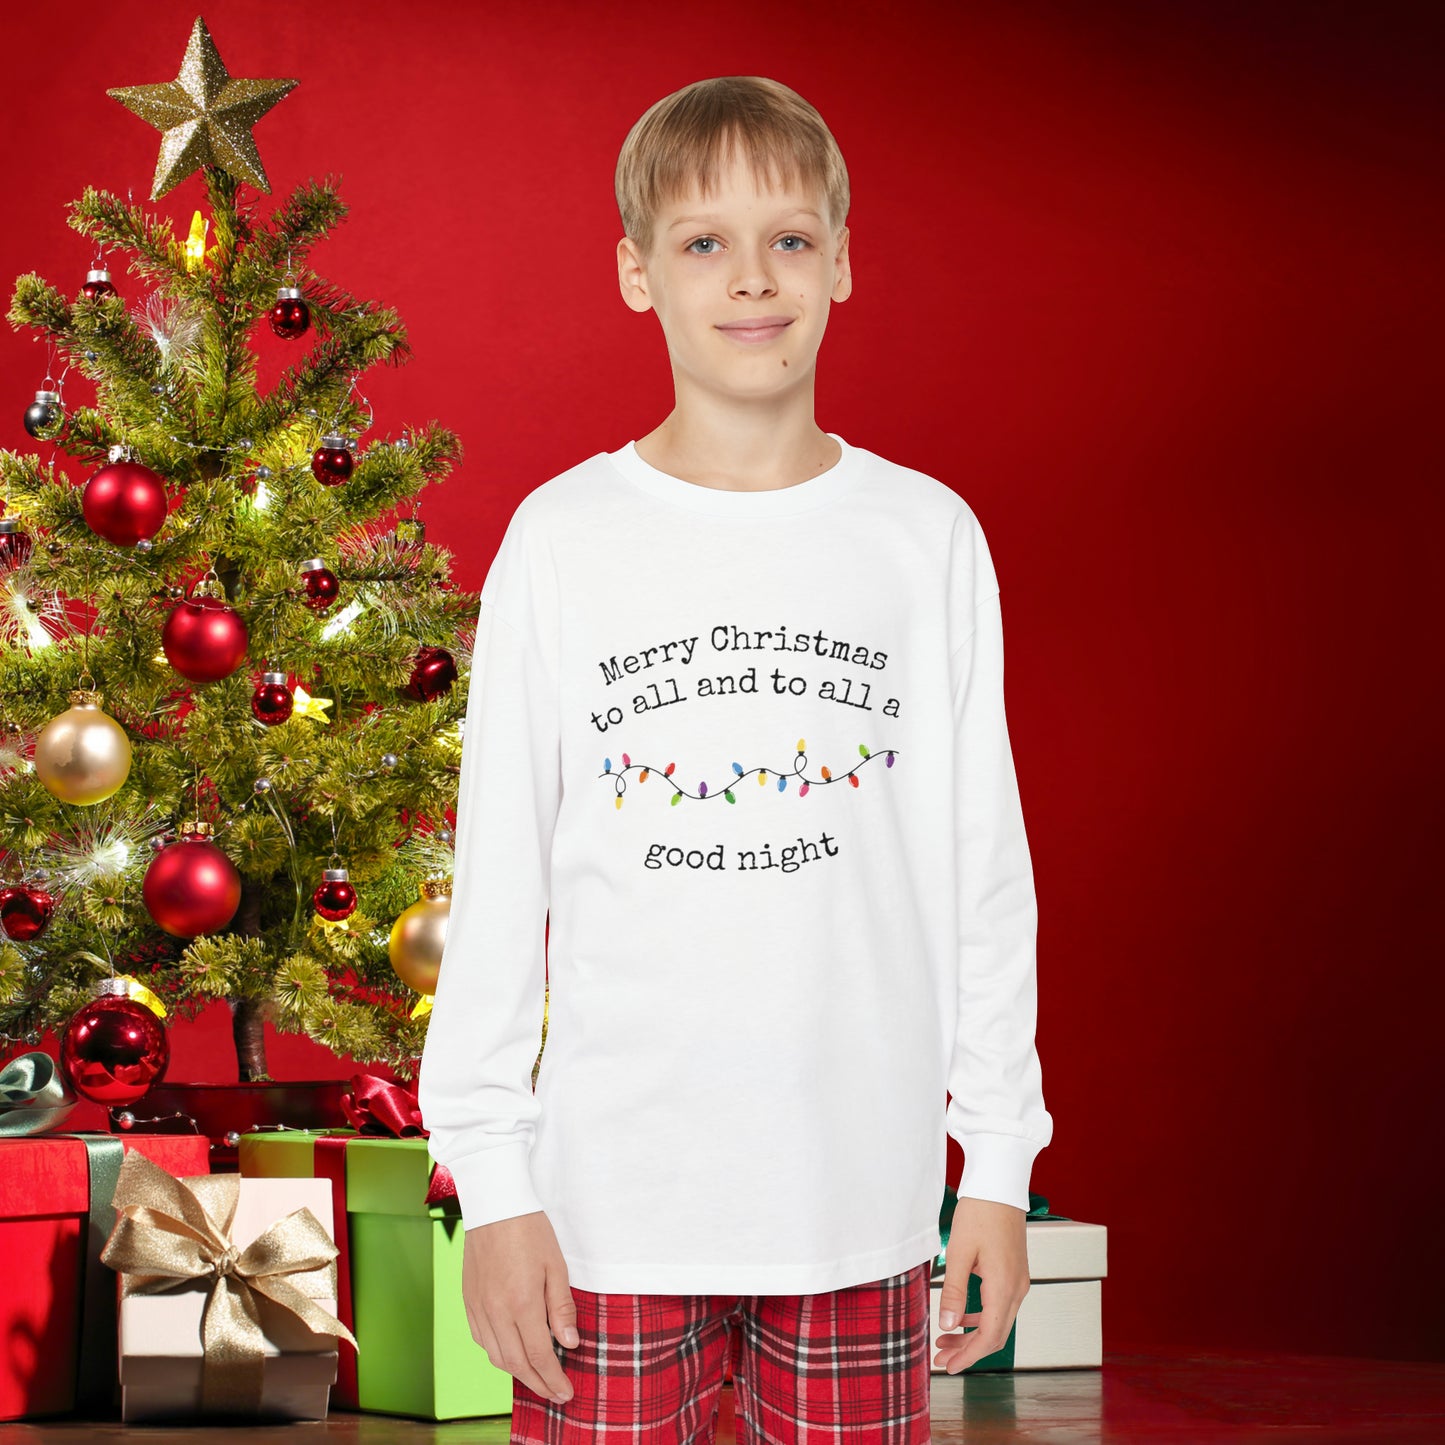 Youth Long Sleeve Holiday Outfit Set, Family Christmas Pajama Set, "Merry Christmas to all and to all a good night" Shirt and Flannel Pant Set